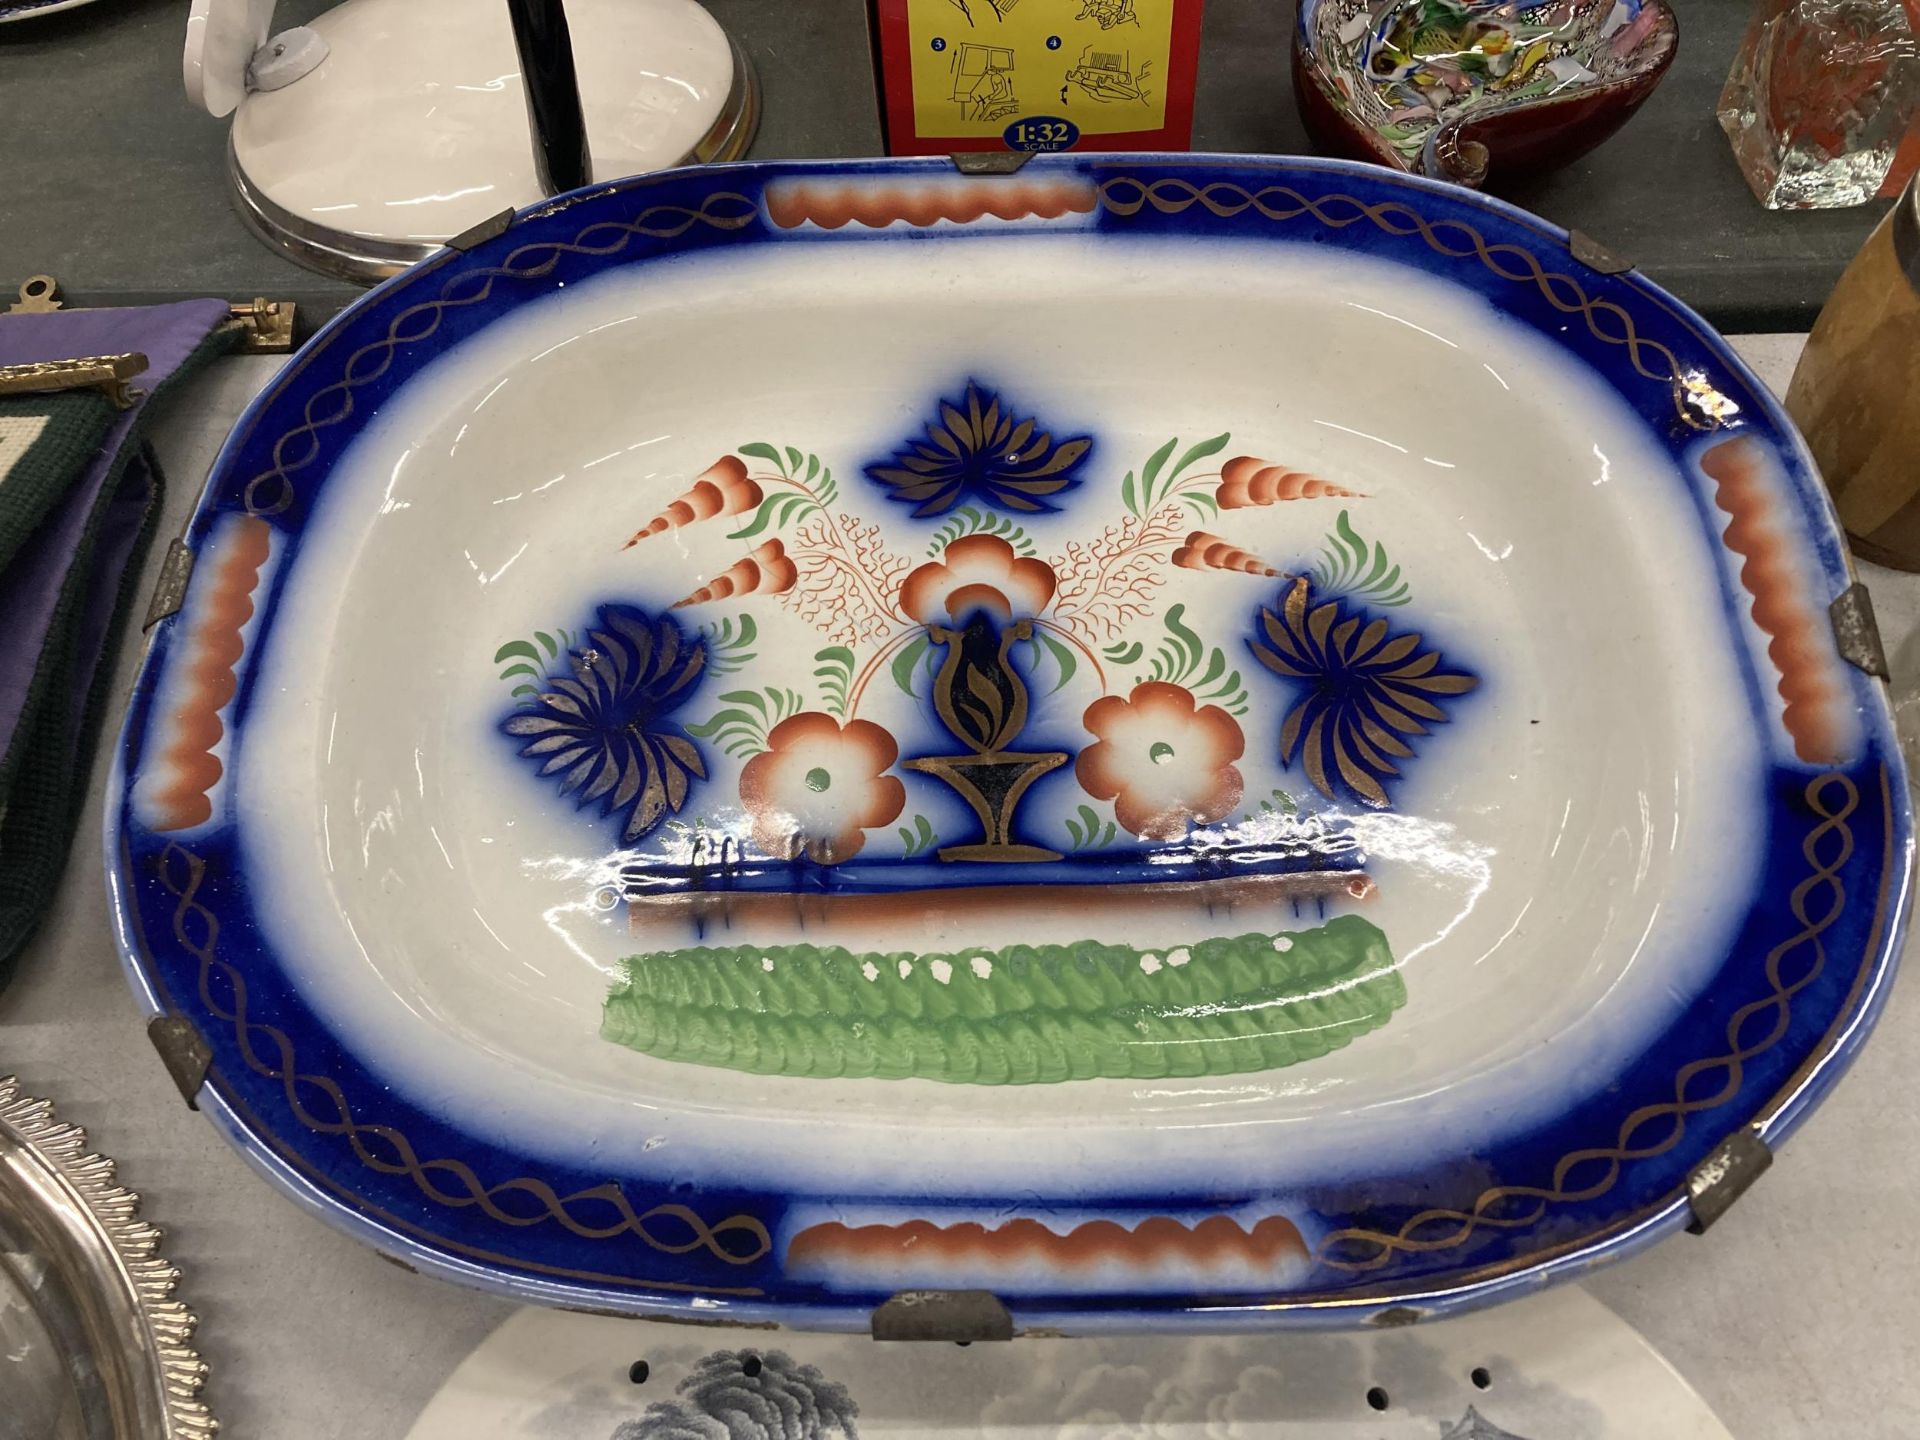 A LARGE VINTAGE CERAMIC PLATTER WITH FLORAL DESIGN, A BLUE AND WHITE BOWL AND A VINTAGE DRAINAGE - Image 5 of 5